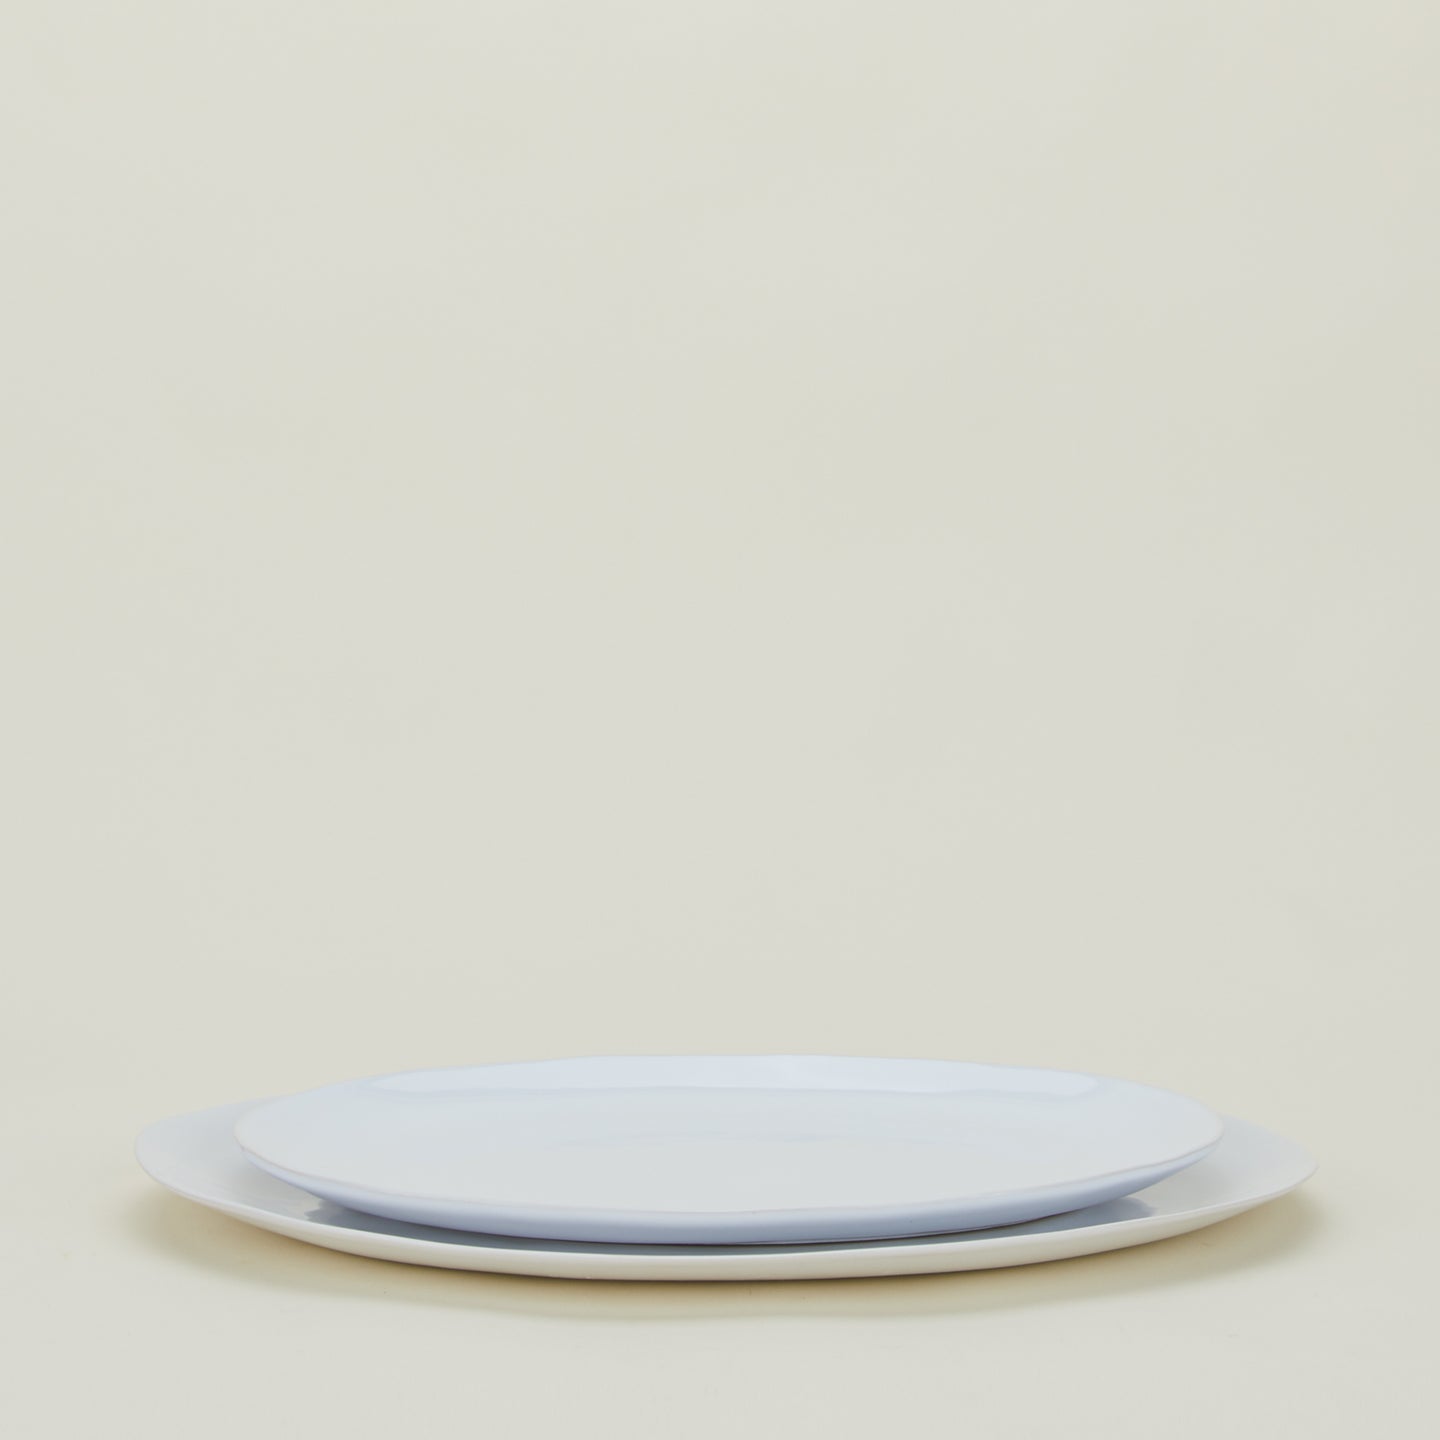 White Strata Serving Platter in two sizes stacked.